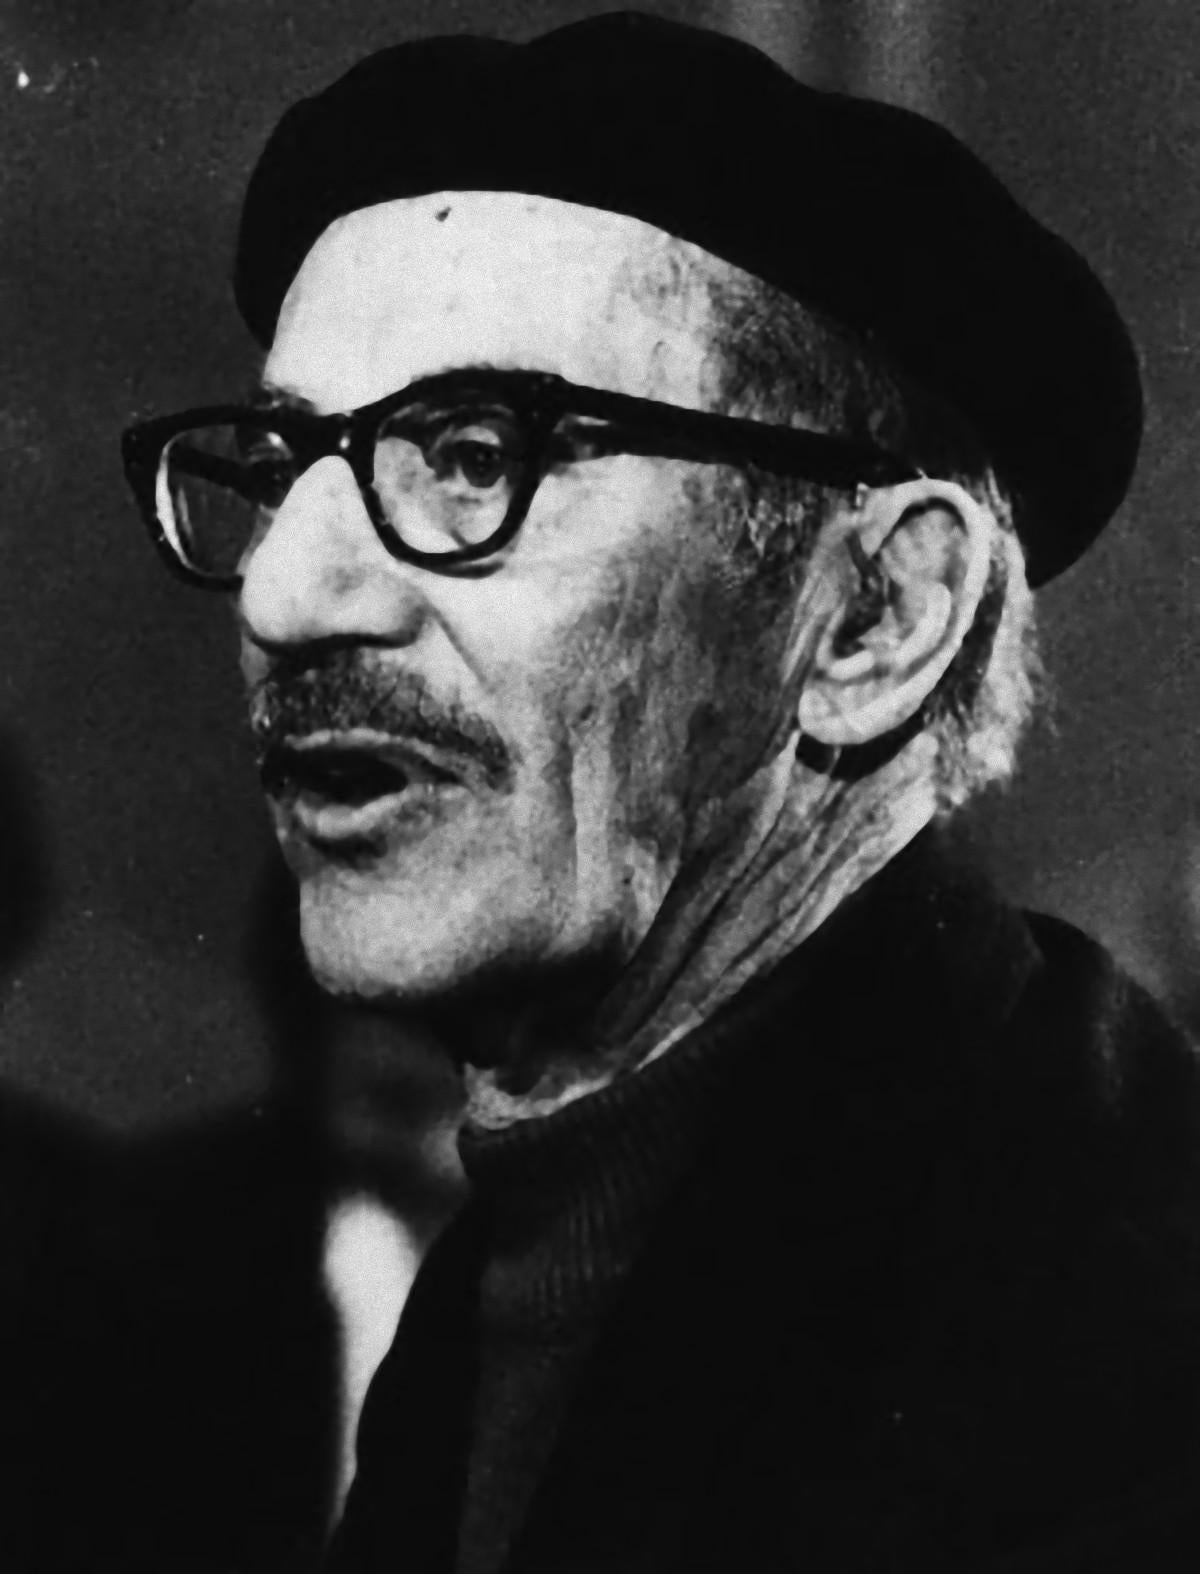 Unknown Figurative Photograph - The American Actor Groucho Marx - Vintage b/w Photograph - 1976